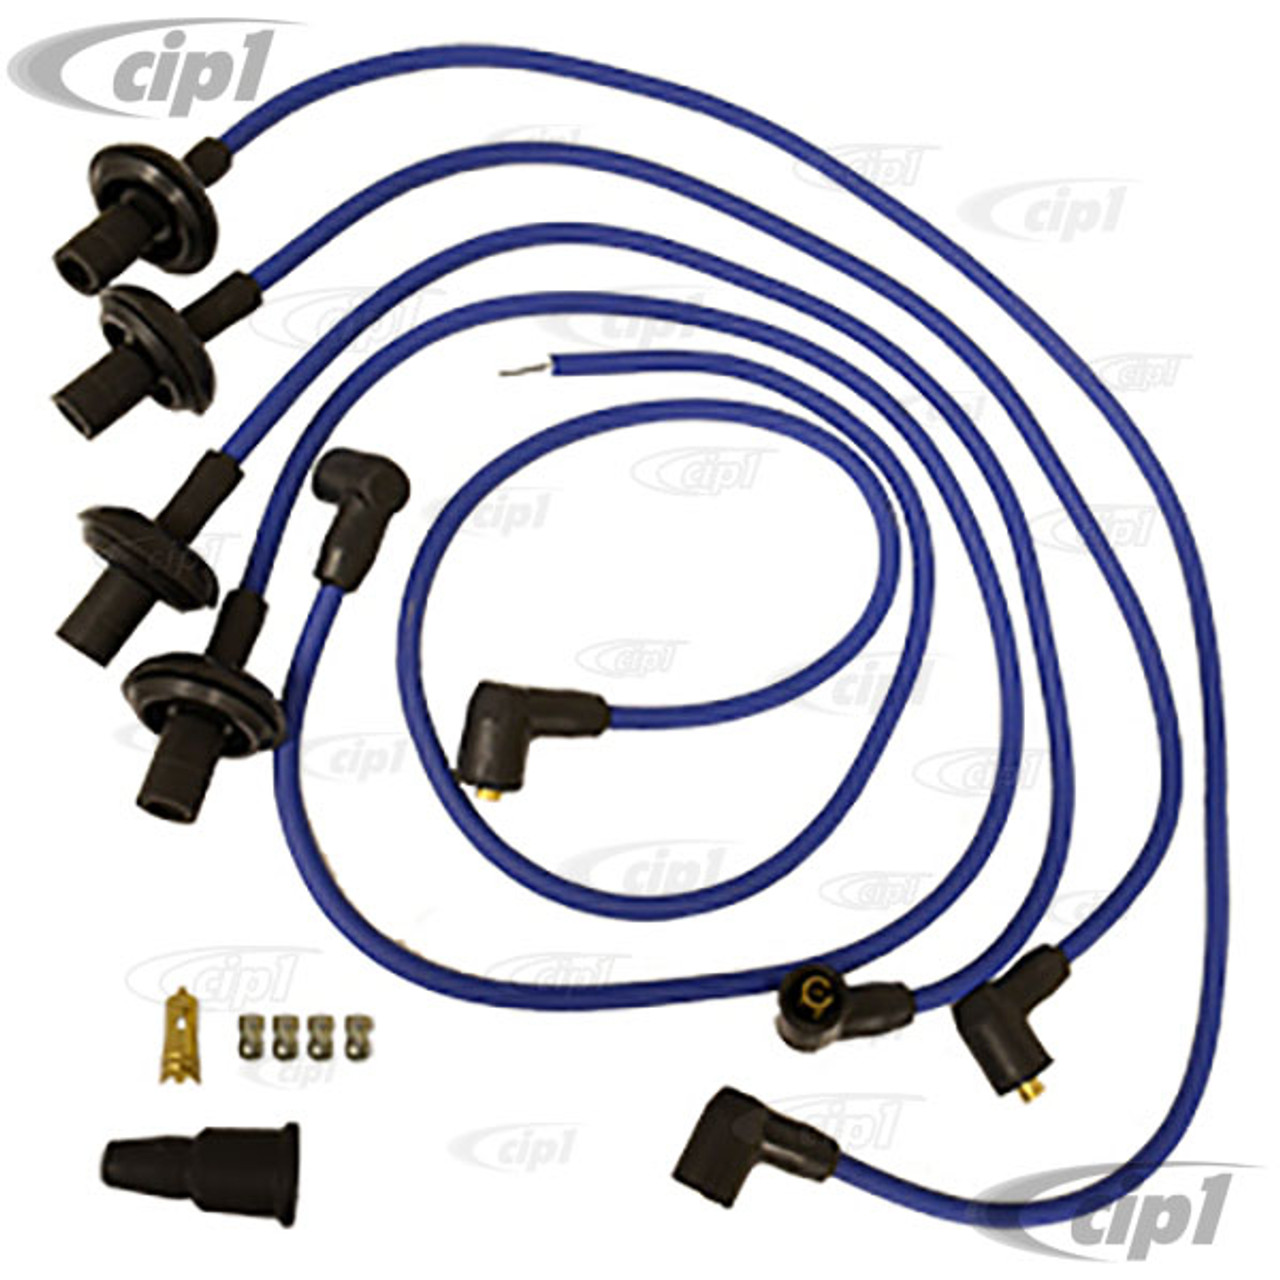 C13-9390 - SUPPRESSED IGNITION WIRE SET WITH 90 DEGREE CAP ENDS - BLUE -  ALL BEETLE/GHIA/BUS 52-71/TYPE-3 WITH 1600CC STYLE ENGINE (EXTRA LONG COIL